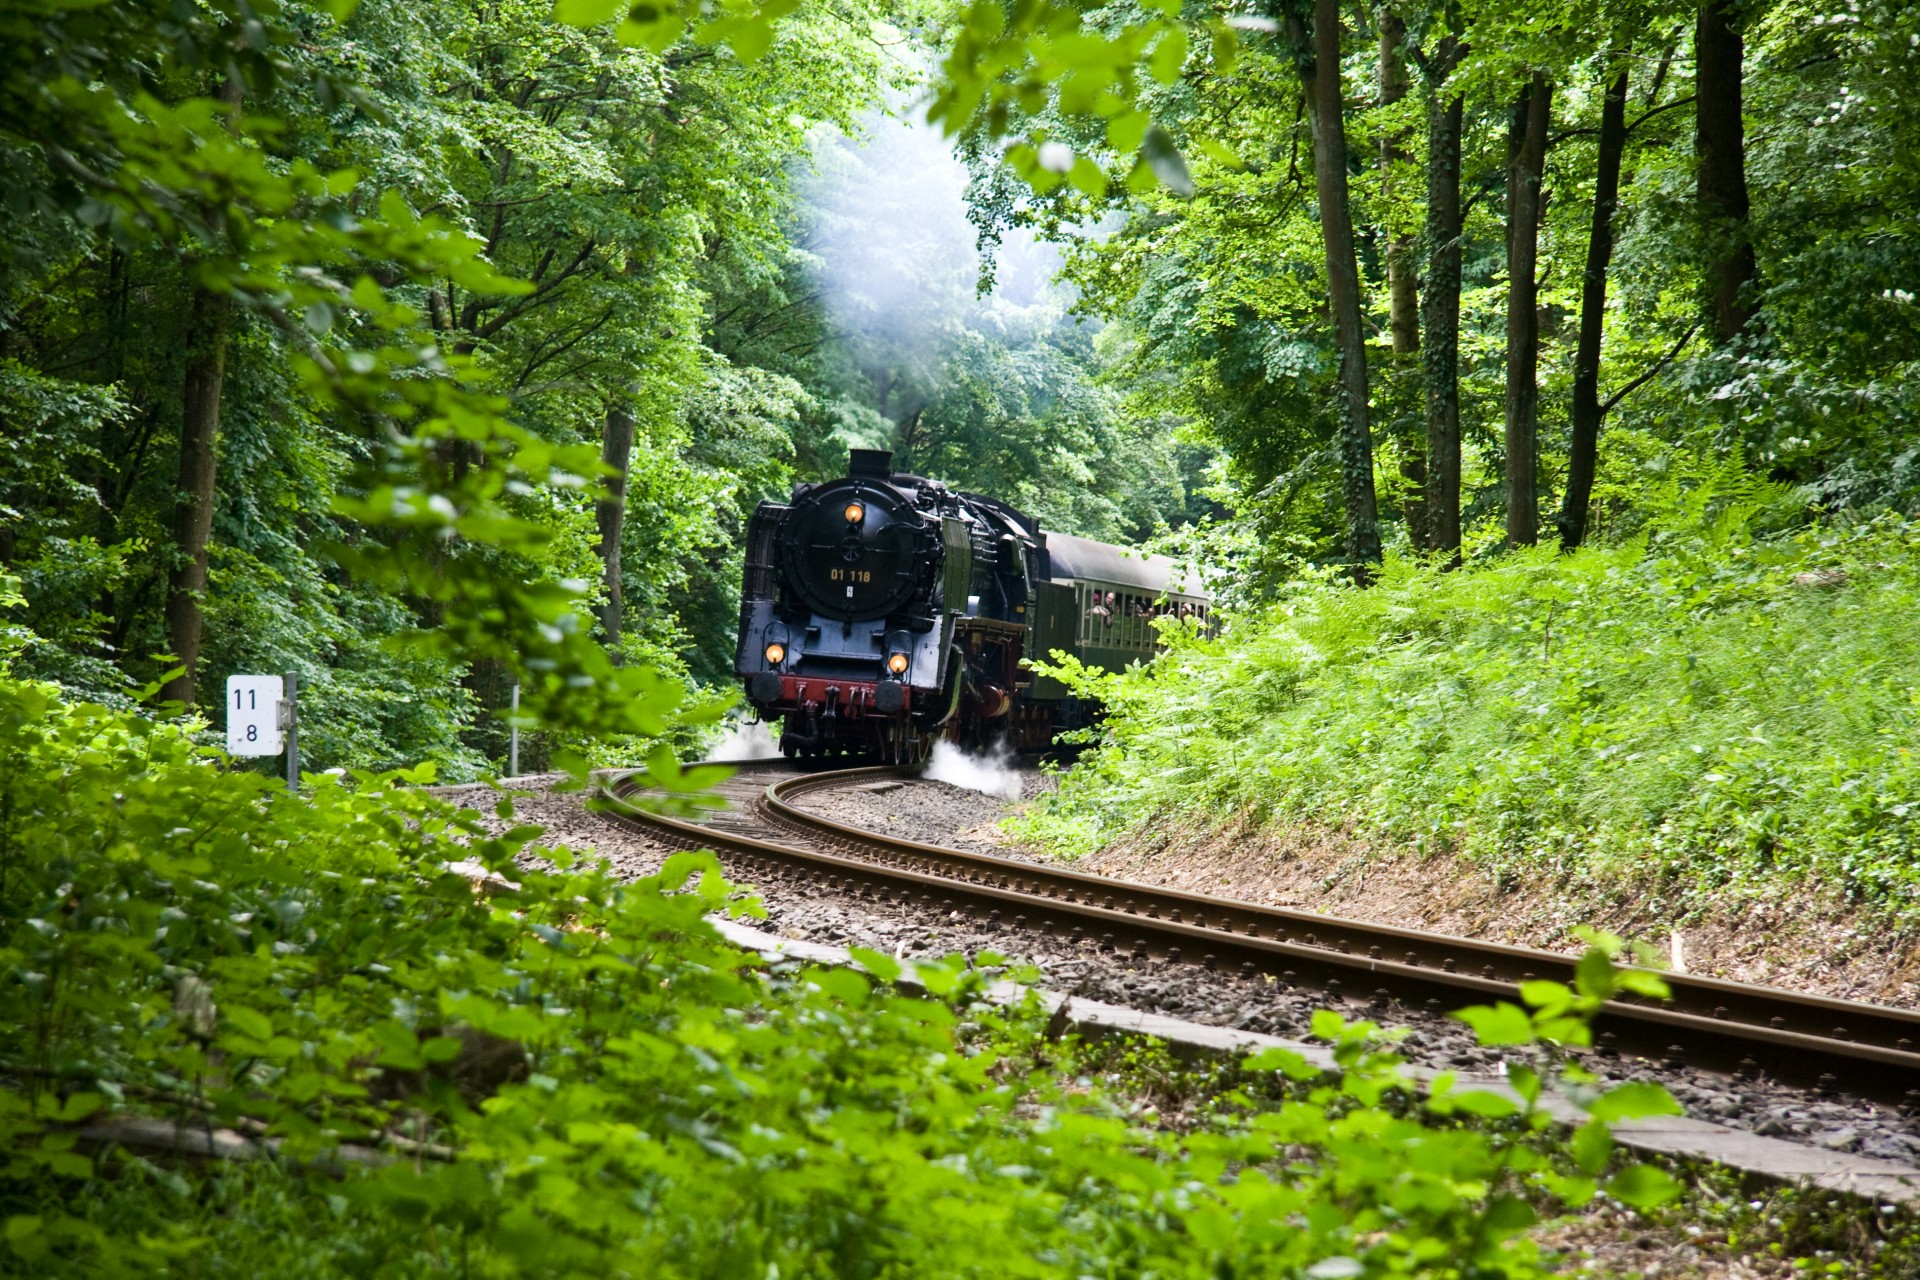 Steam locomotive on the road through the forest